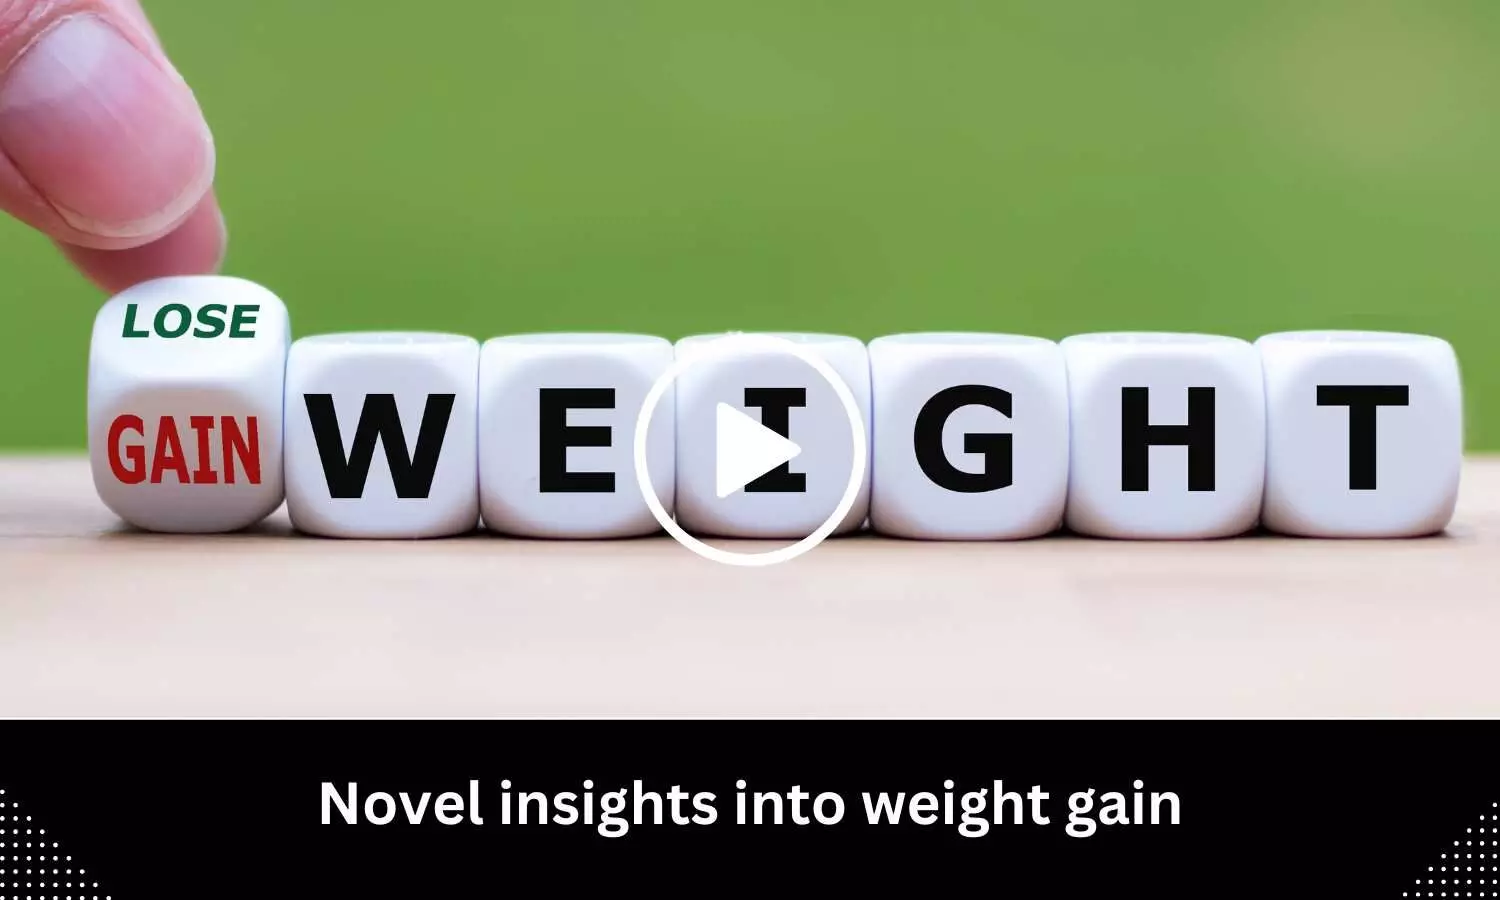 Novel insights into weight gain